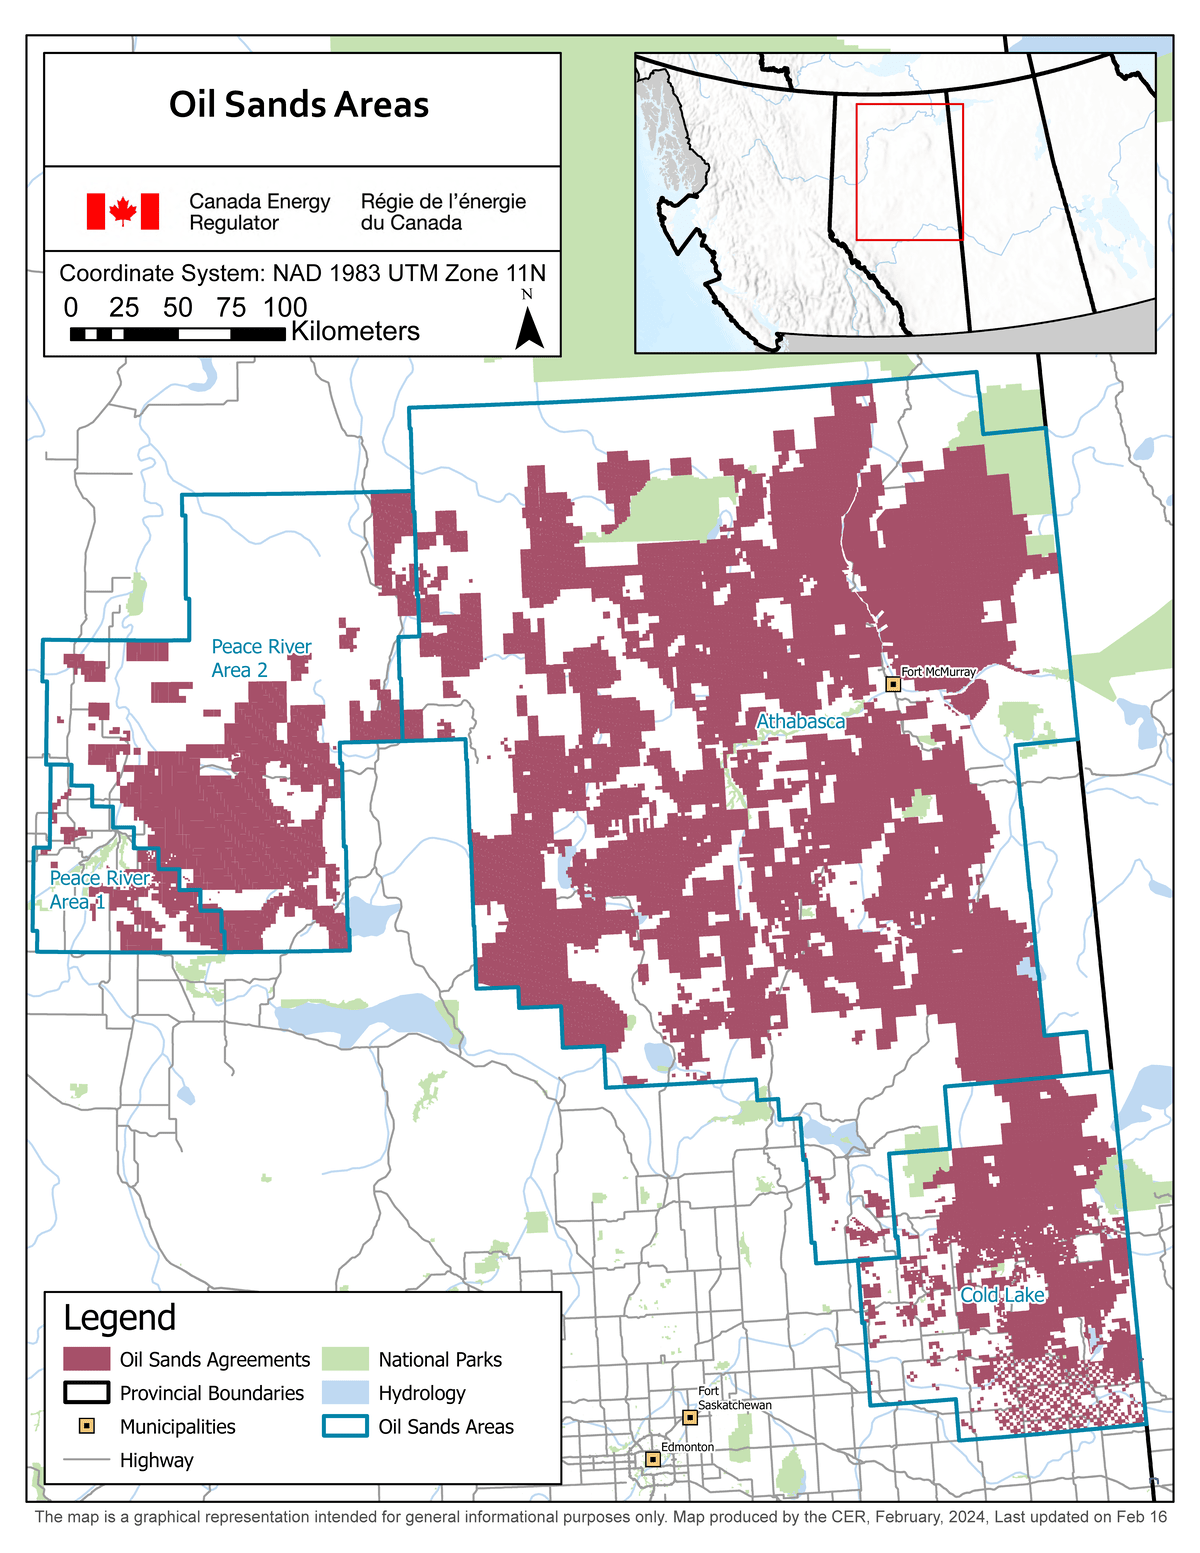 Oil sands areas map